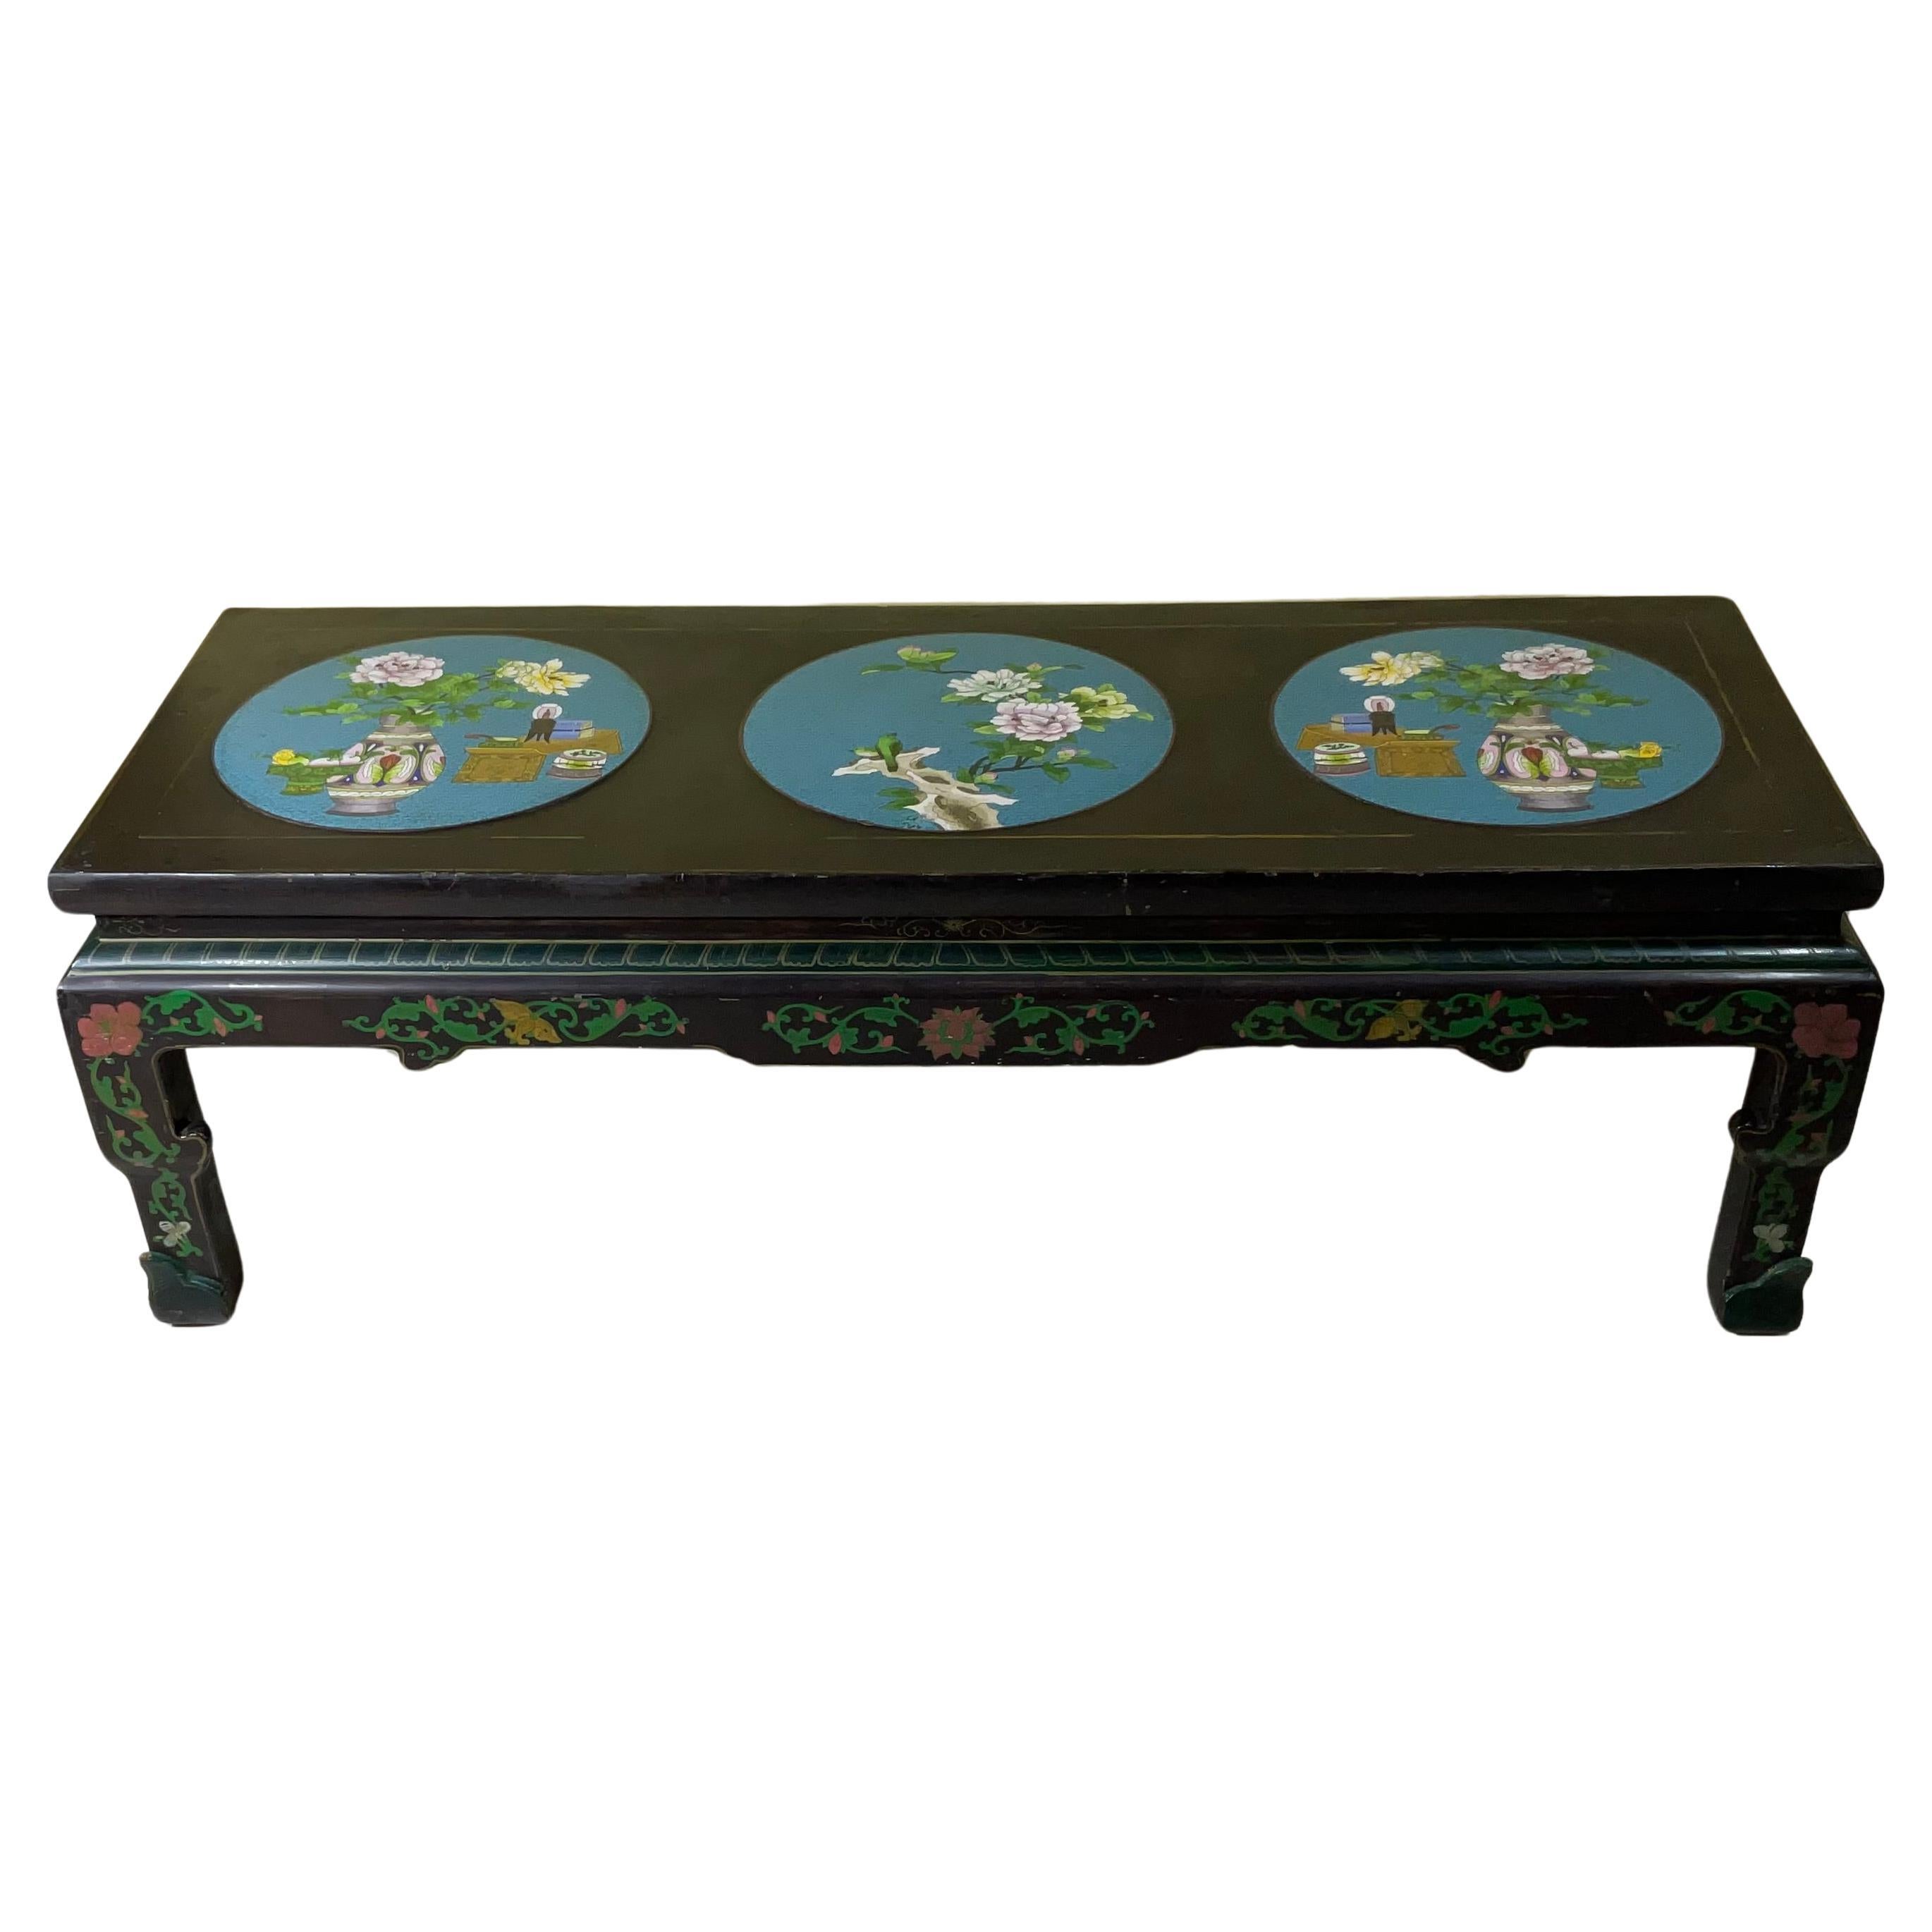 Antique lacquer Chinese Coffee Table With Three Colorful Cloisonné Medallion